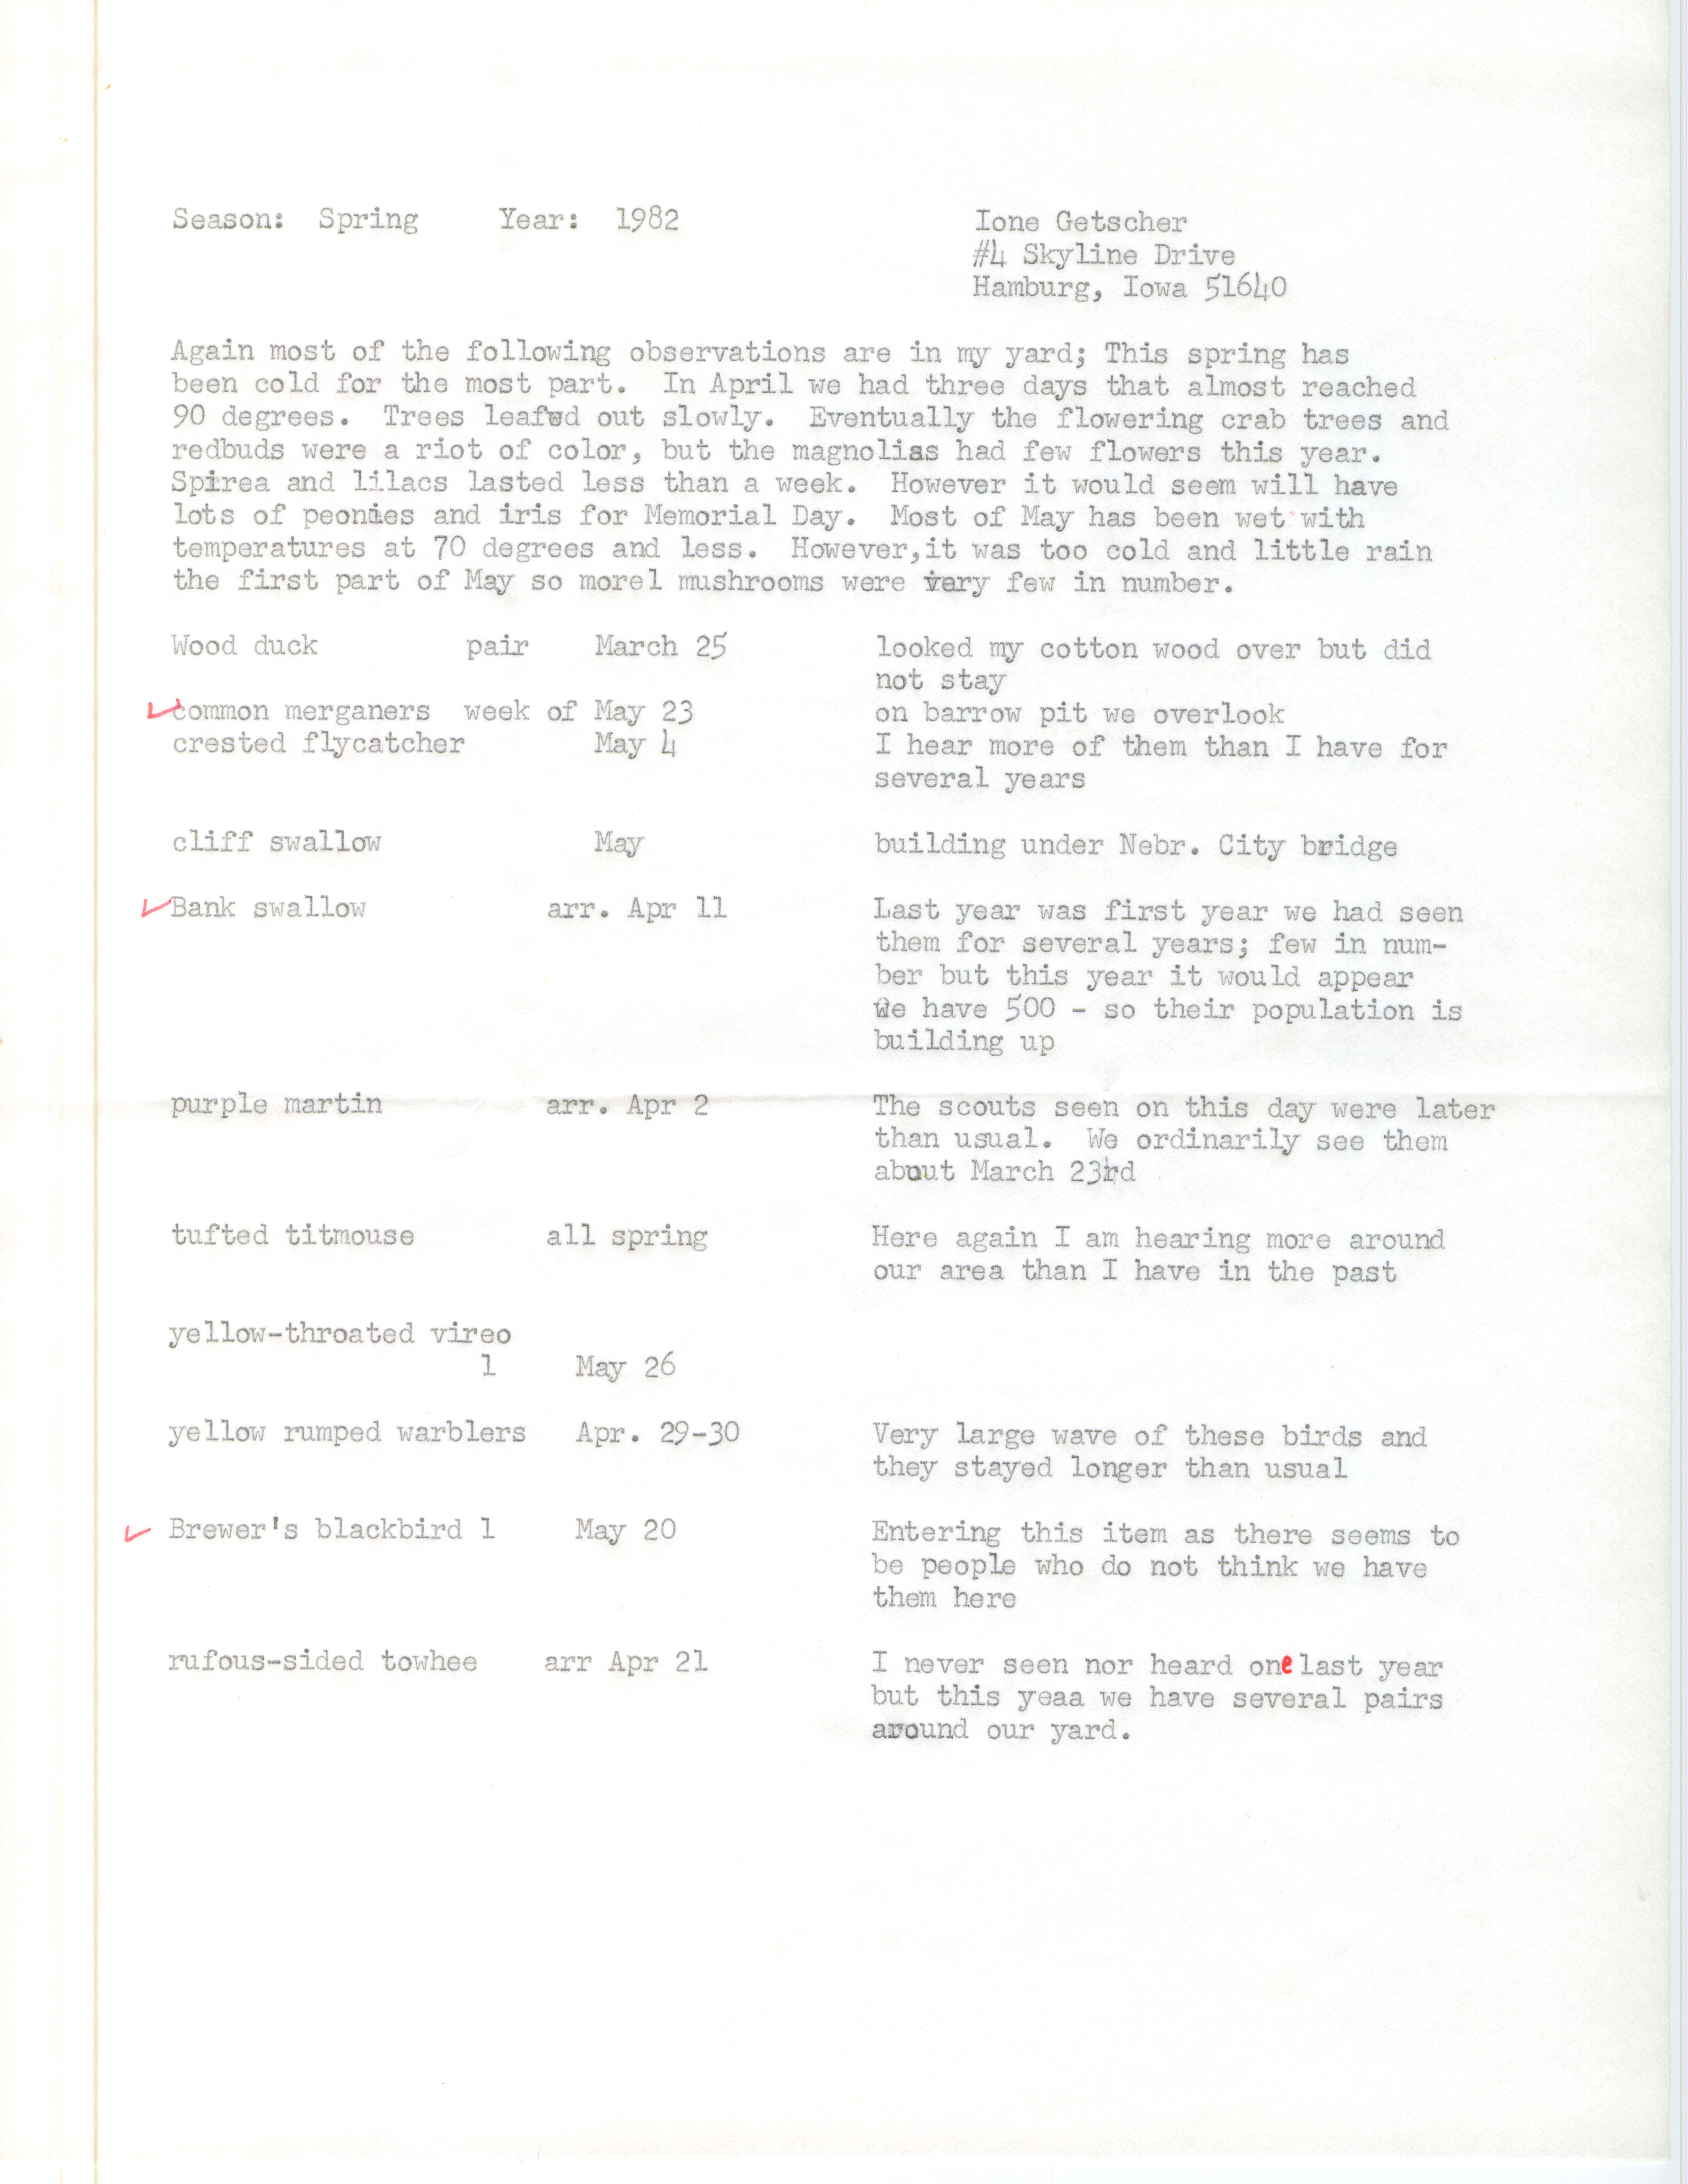 Field notes contributed by Ione Getscher, spring 1982